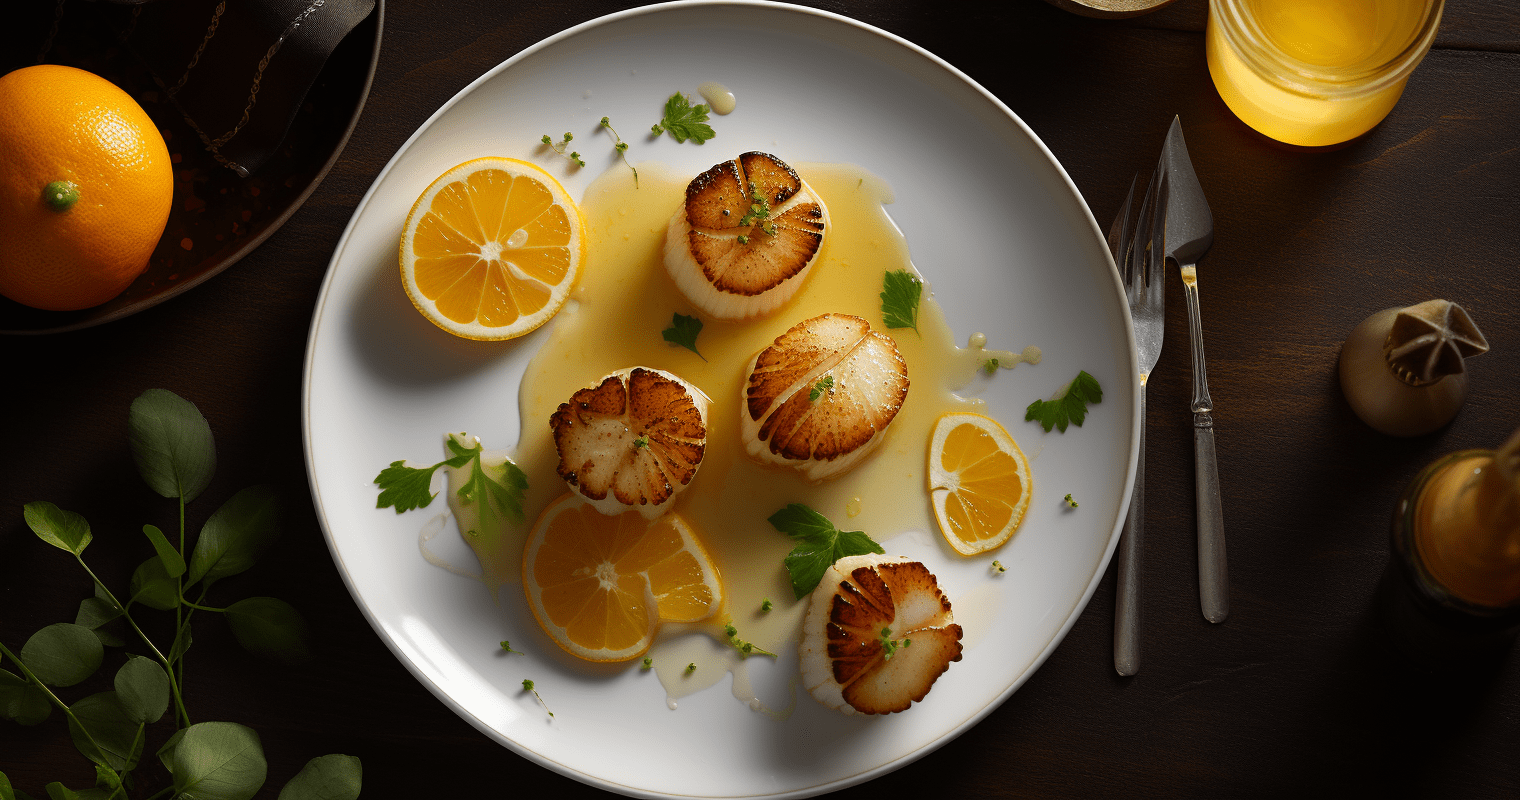 Indulge in the Delicate Flavors of Seared Scallops with Citrus Beurre Blanc